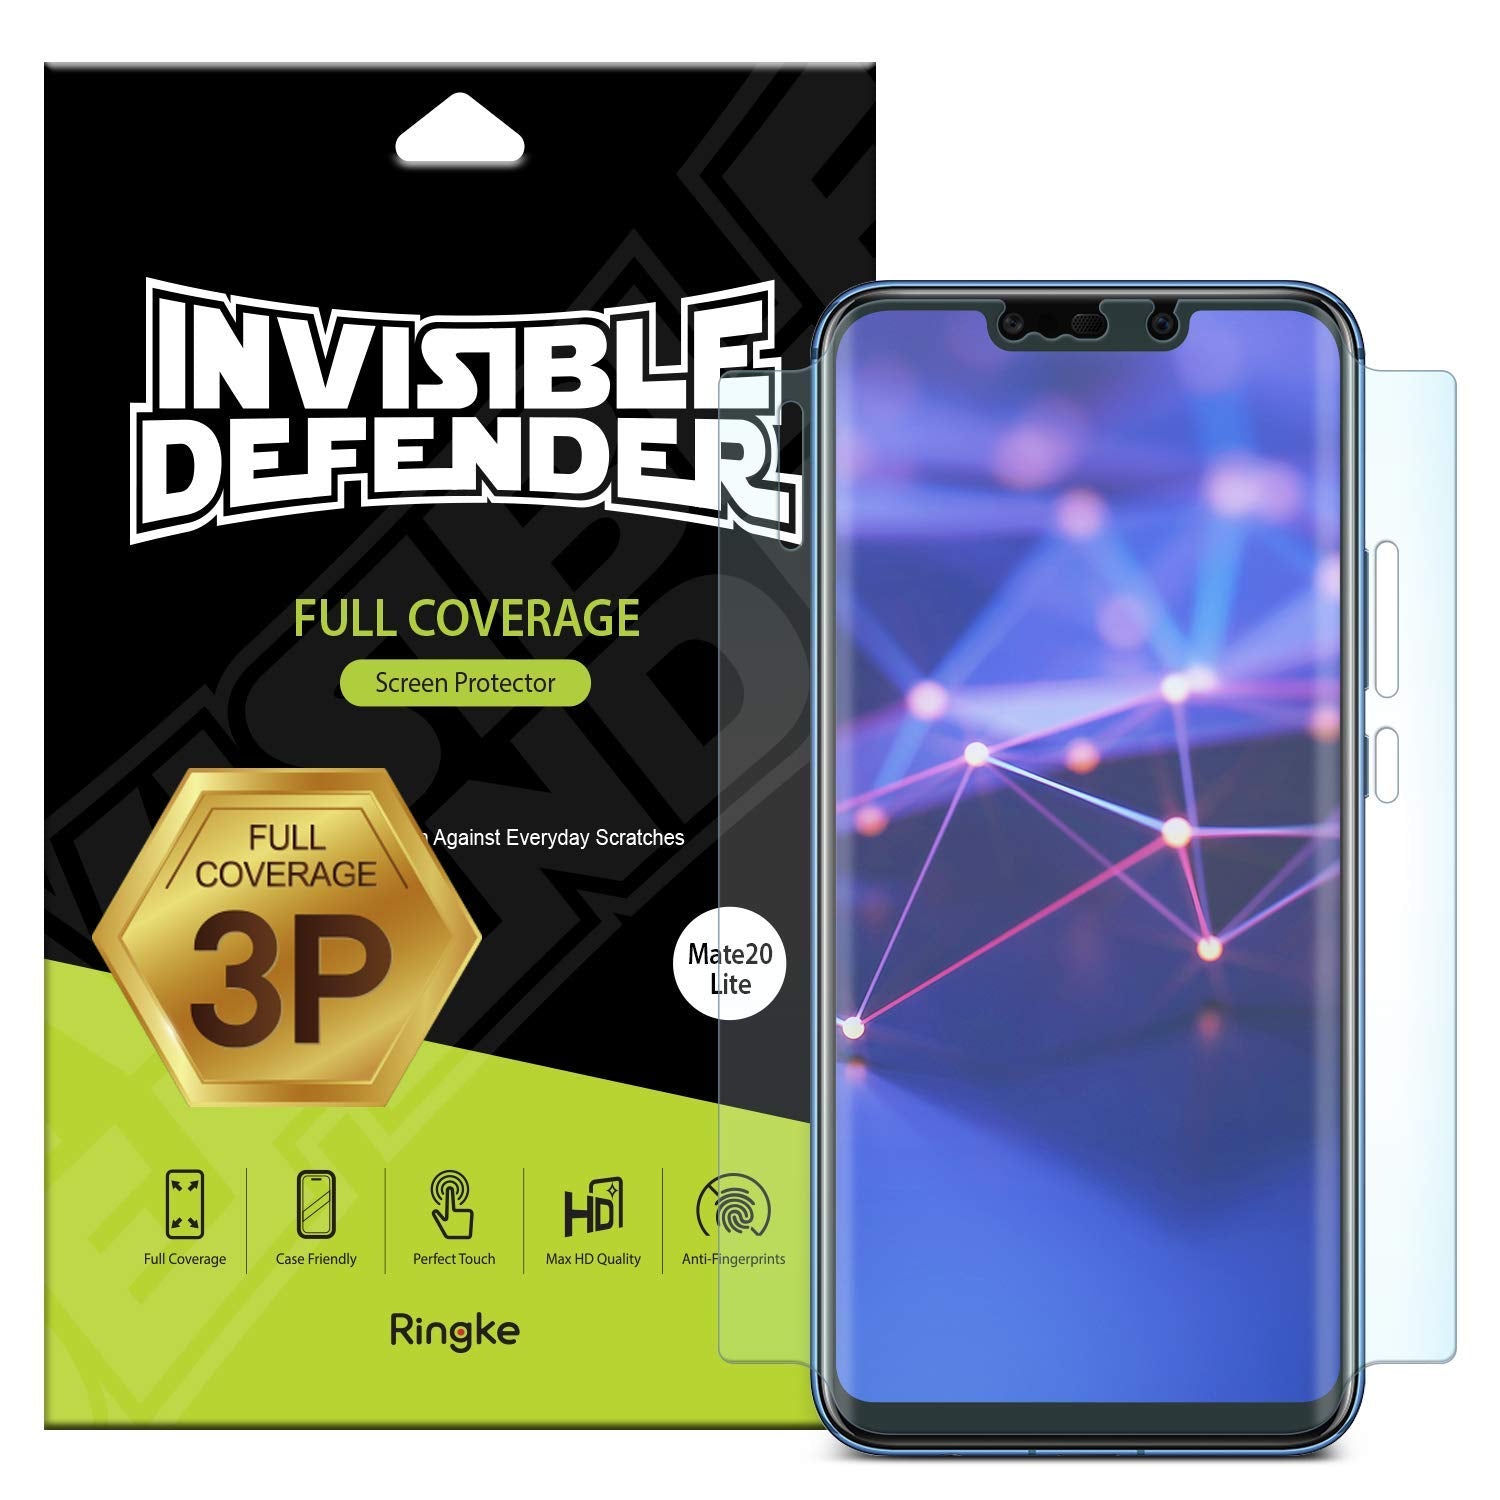 huawei mate 20 lite invisible defender full coverage 3 pack